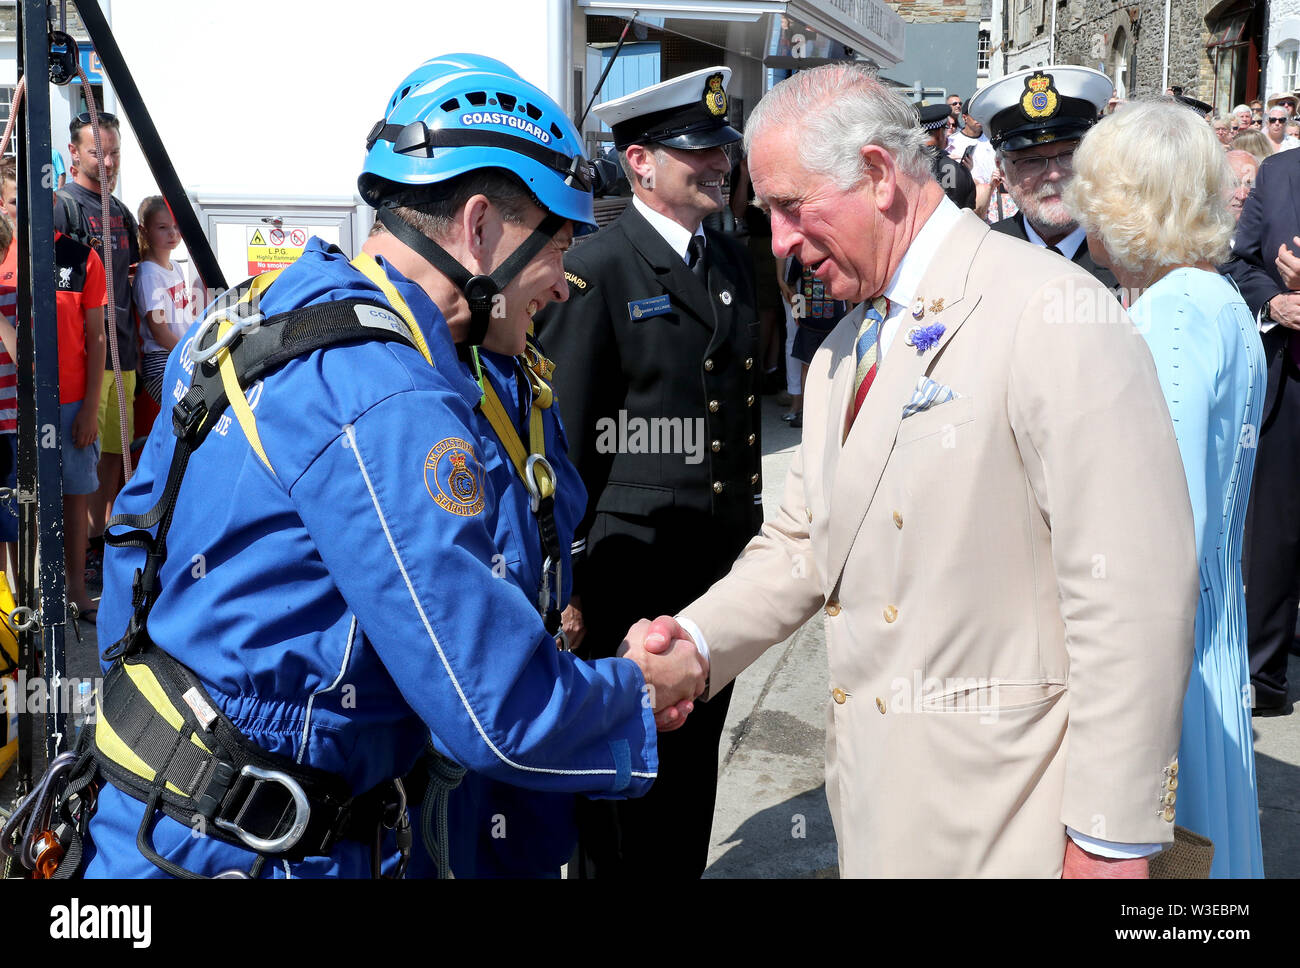 The Duke of Cornwall meets a member of the Coastguard Search and ...